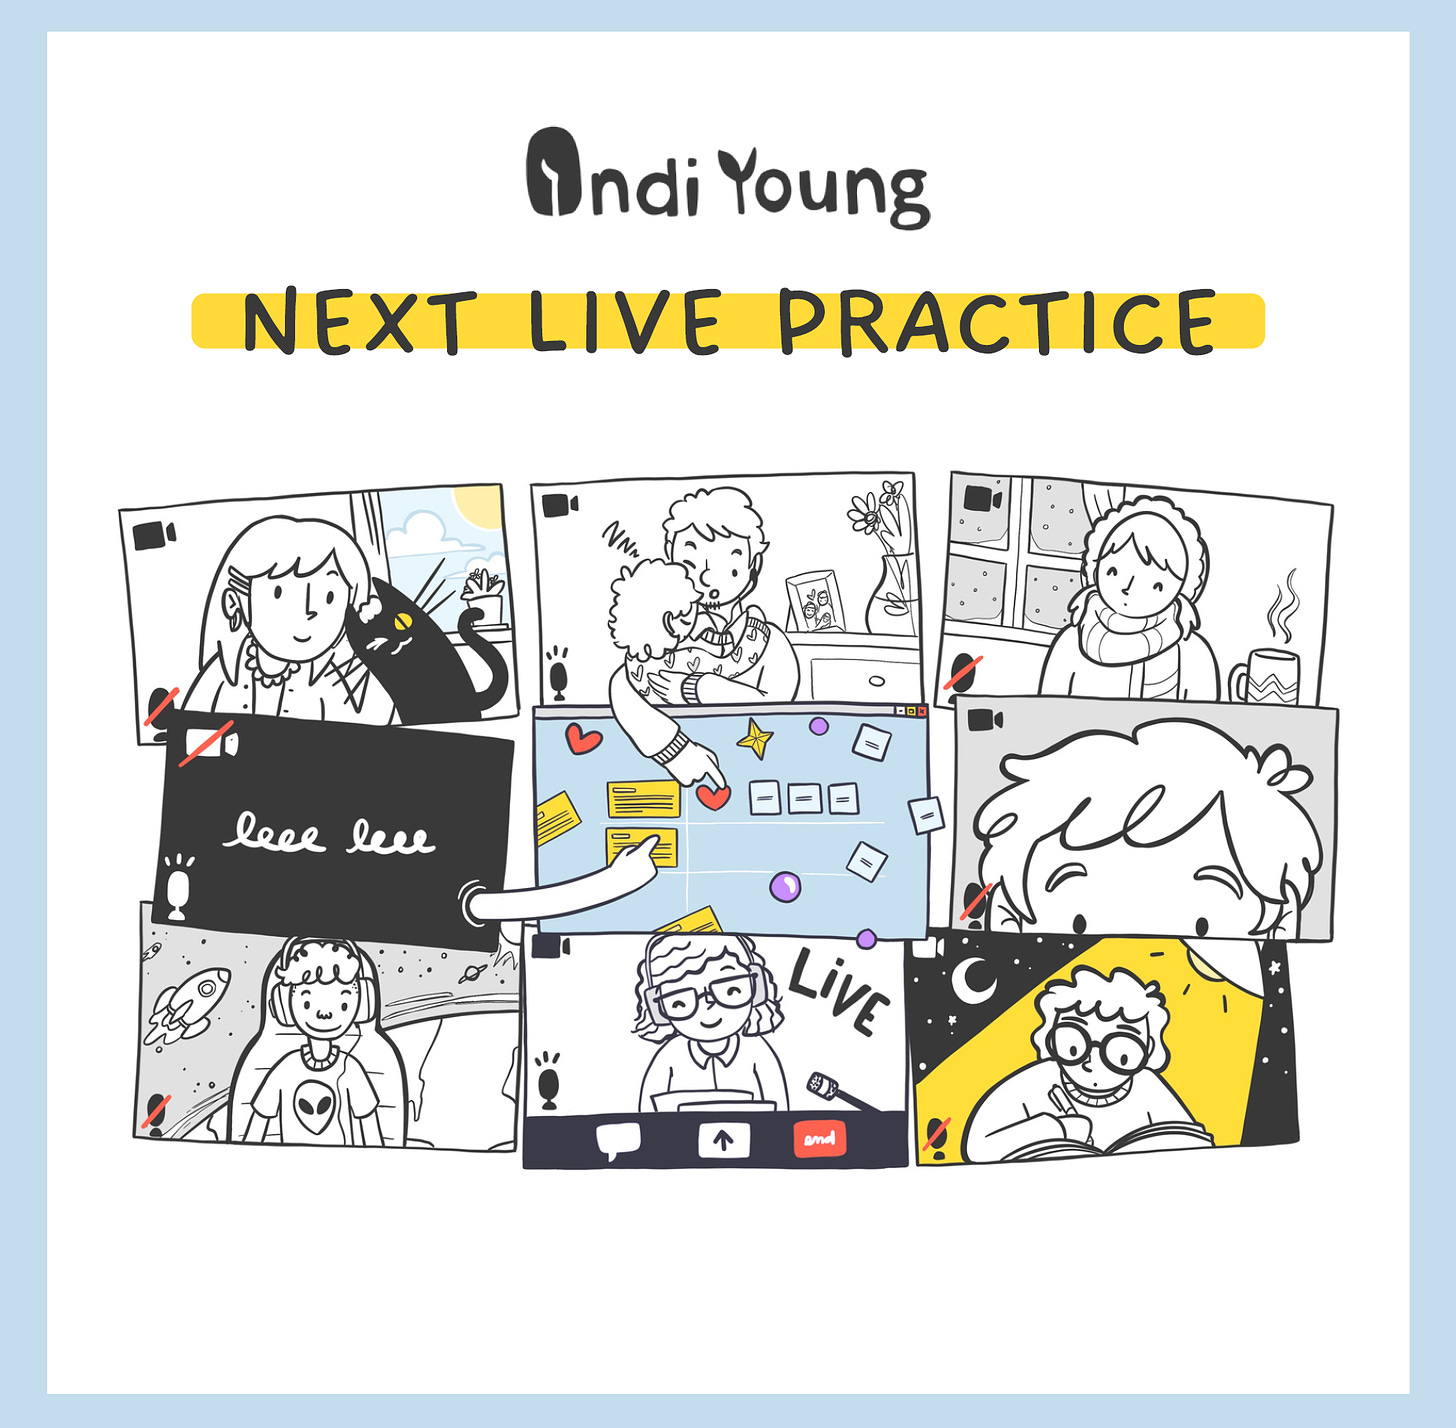 Title "Next Live Practice" with the IndiYoung logo. Cartoon version of a Zoom screen with people in the squares. One person is holding a baby and with their other hand is moving an object on a Mural board, in collaboration with another person (no camera) moving a description object with them. Indi is Live in one square. There is a cat in one square.